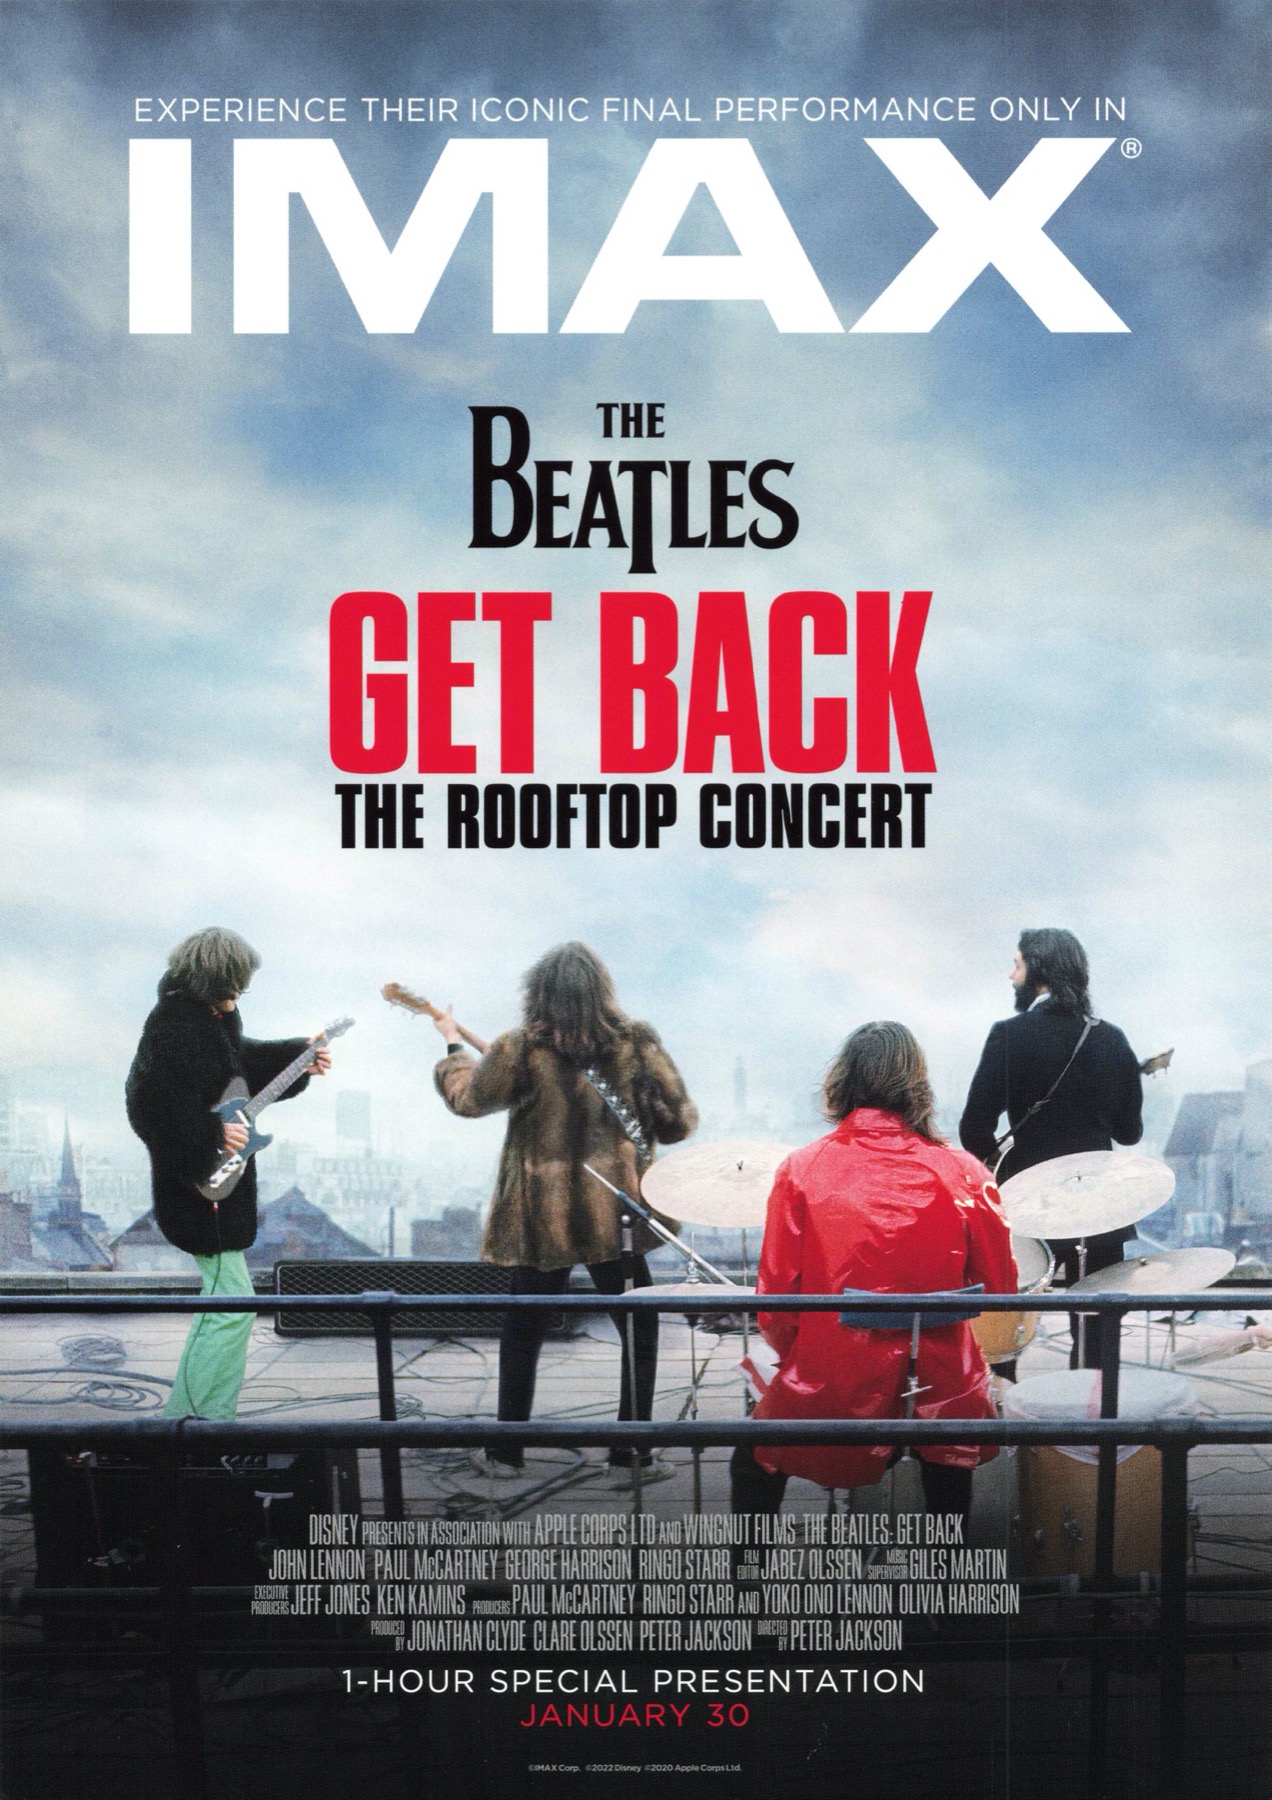 THE BEATLES GET BACK THE ROOFTOP CONCERT